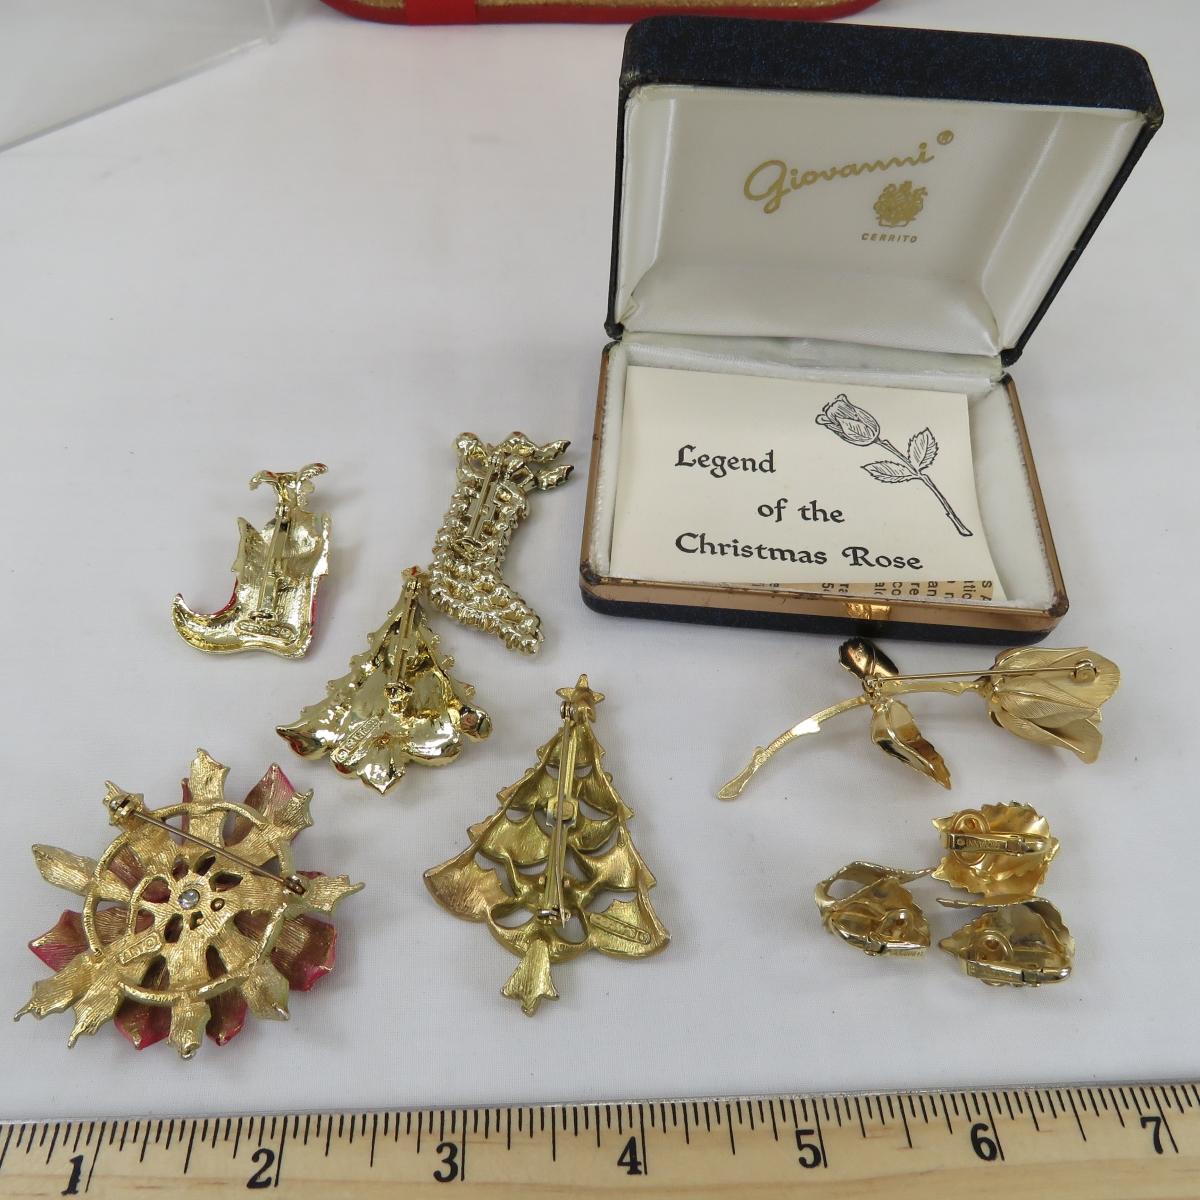 Vintage Christmas Brooches & Jewelry